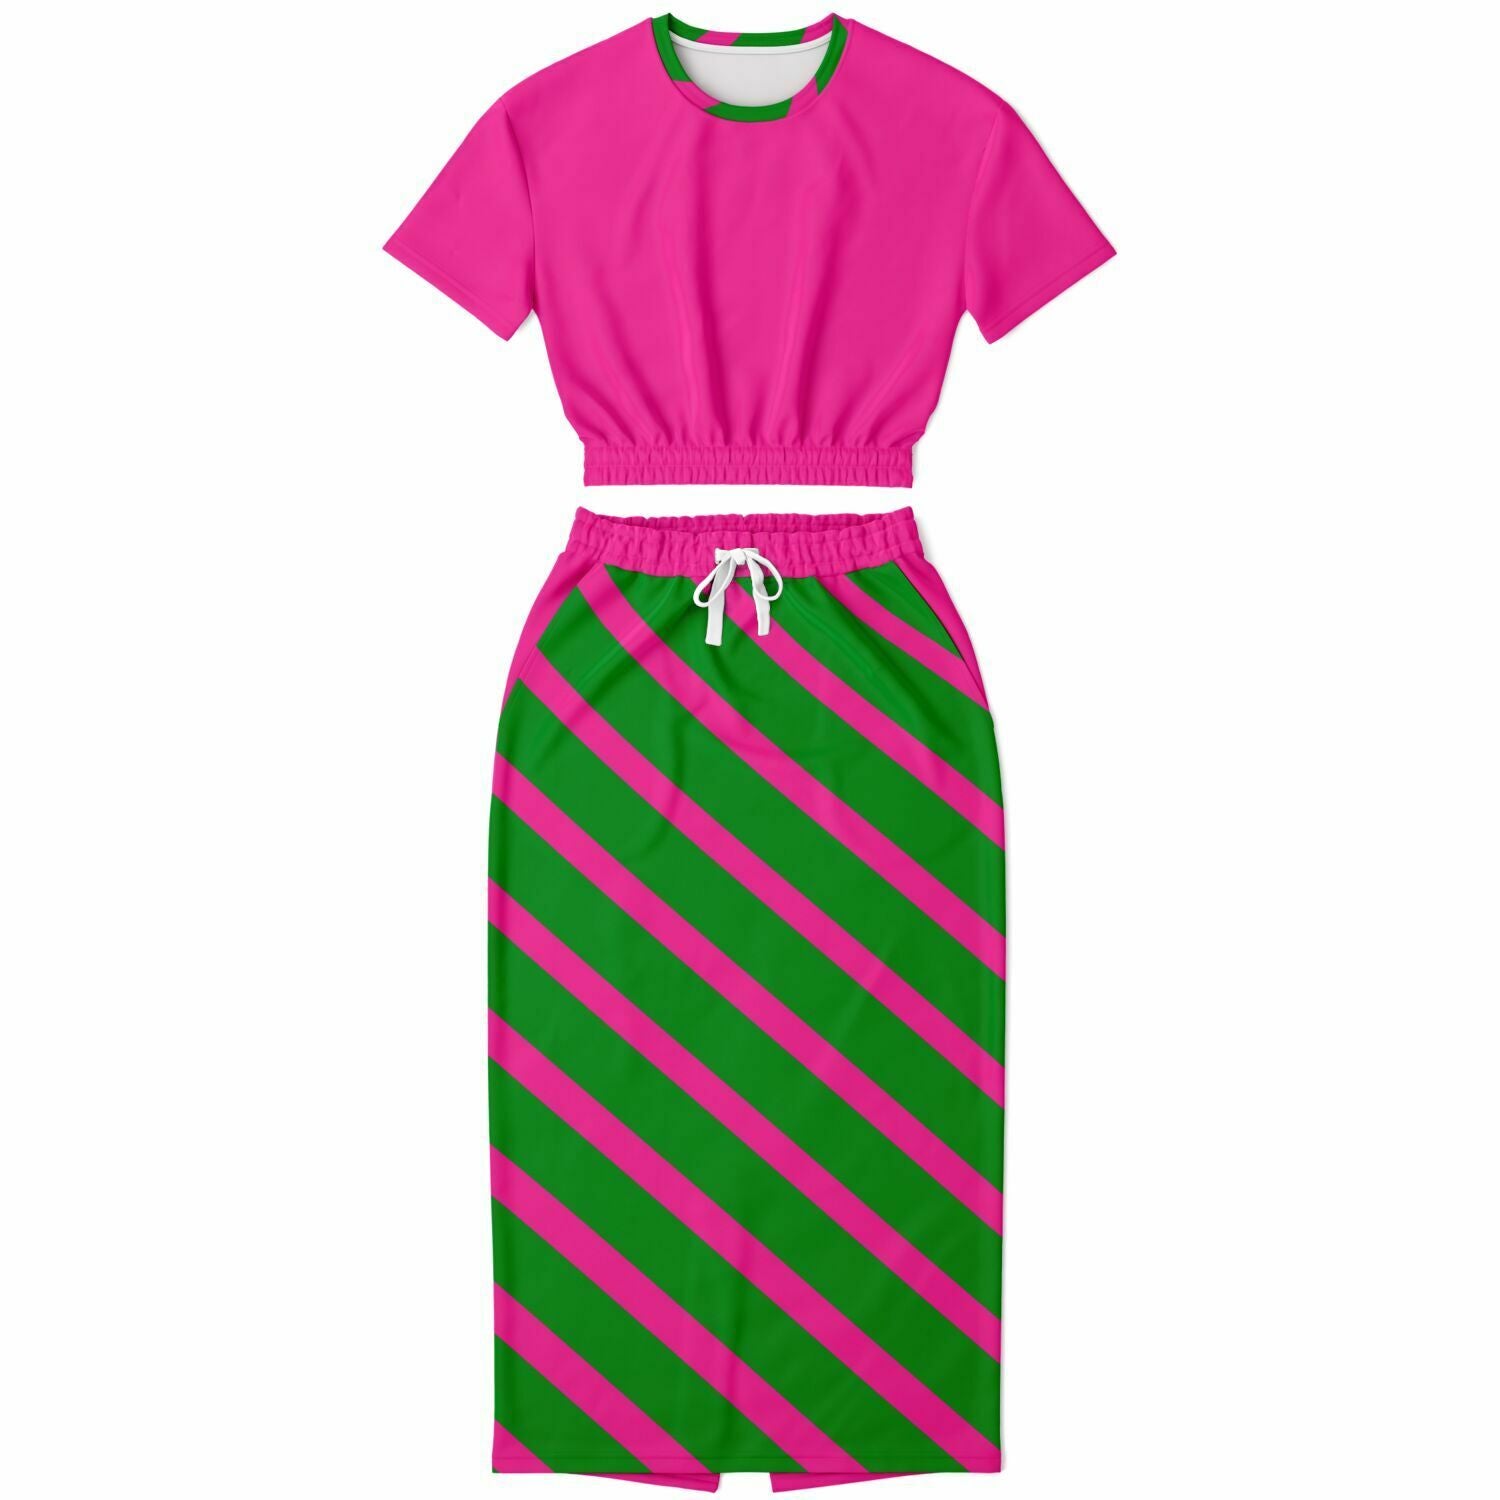 Trends Bright Pink & Green Cropped Skirt Set